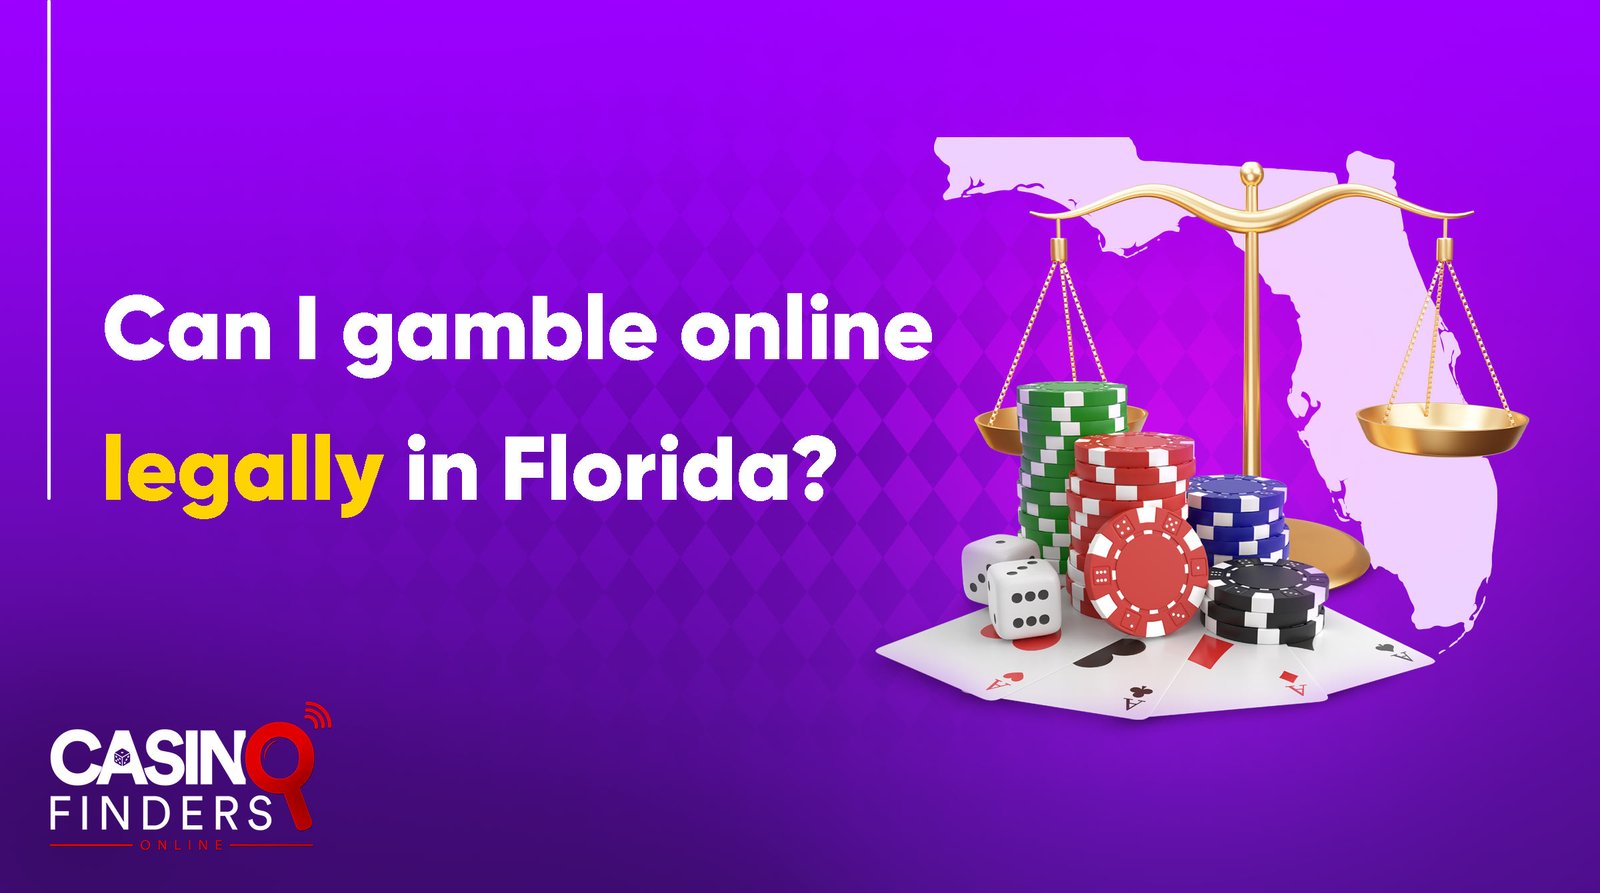 Can I gamble online legally in Florida?